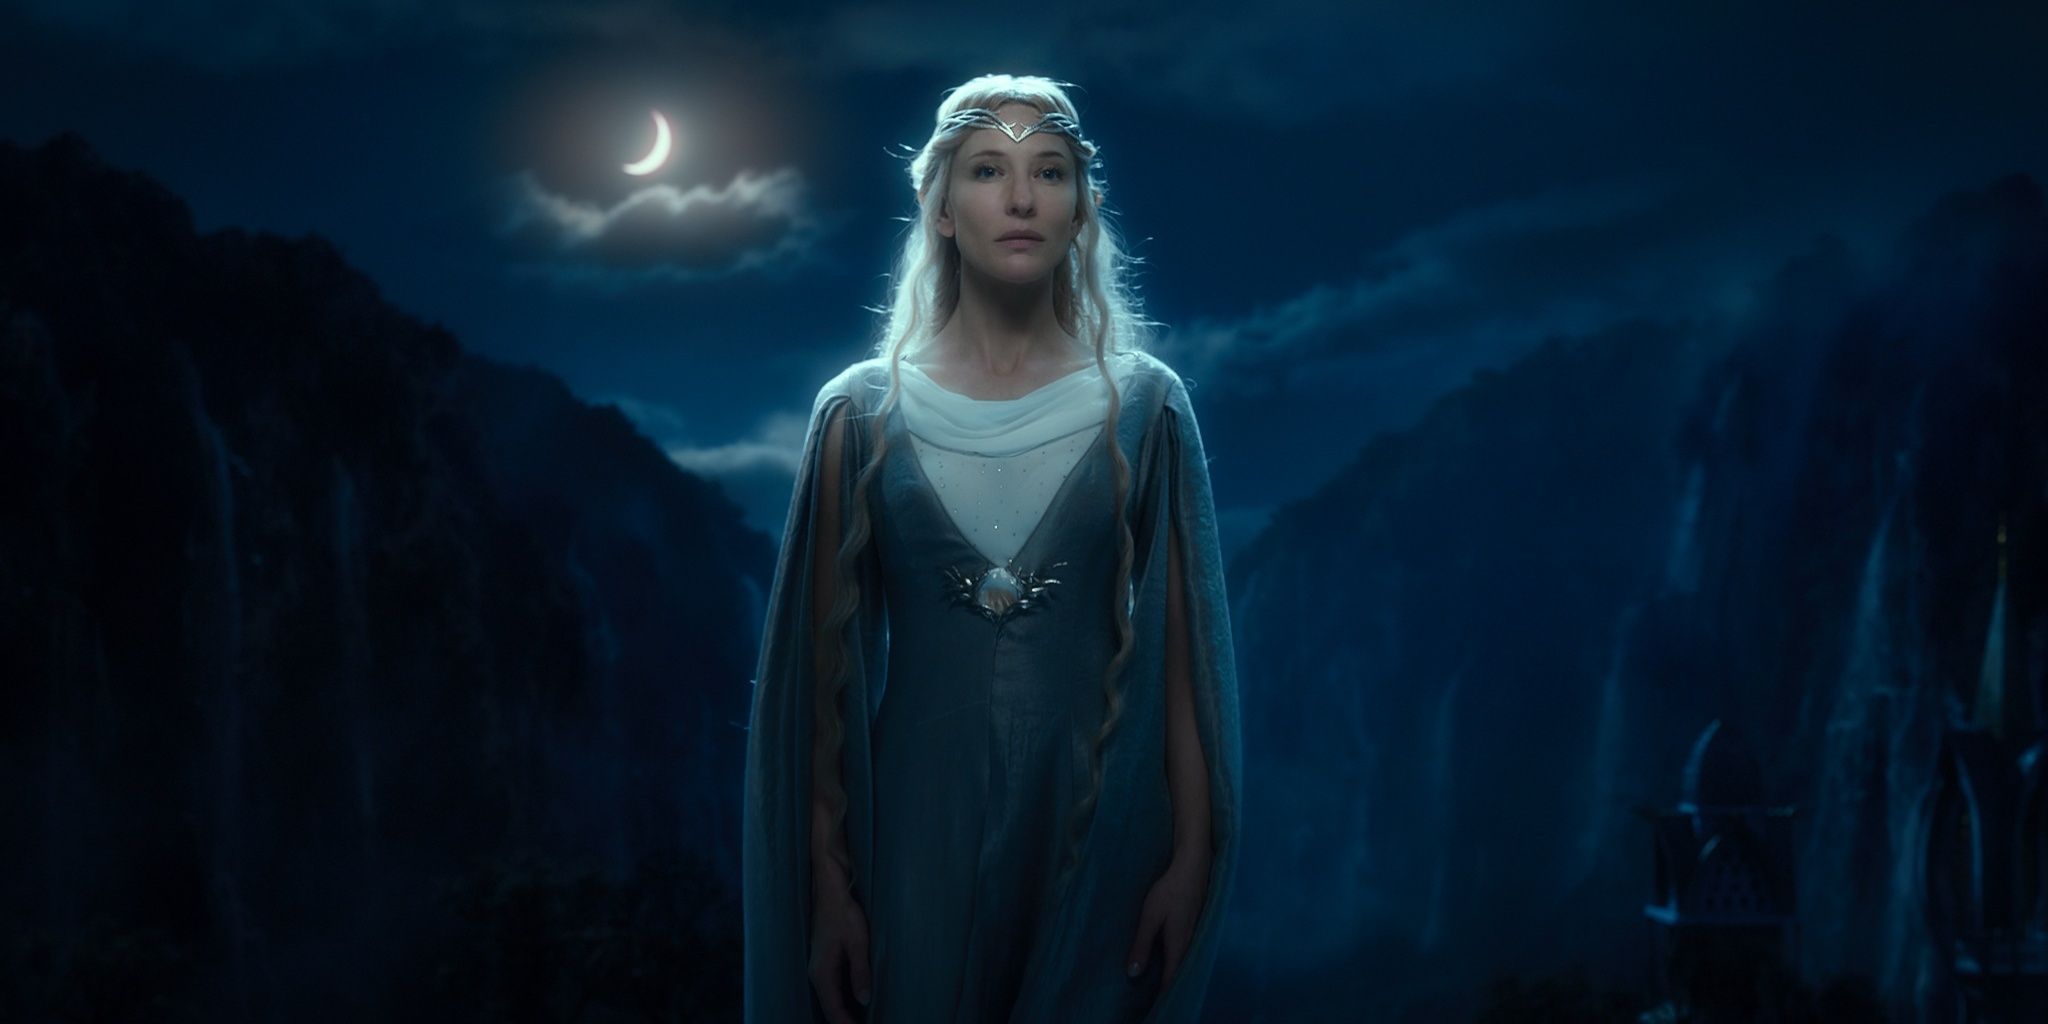 Galadriel in The Hobbit: An Unexpected Journey